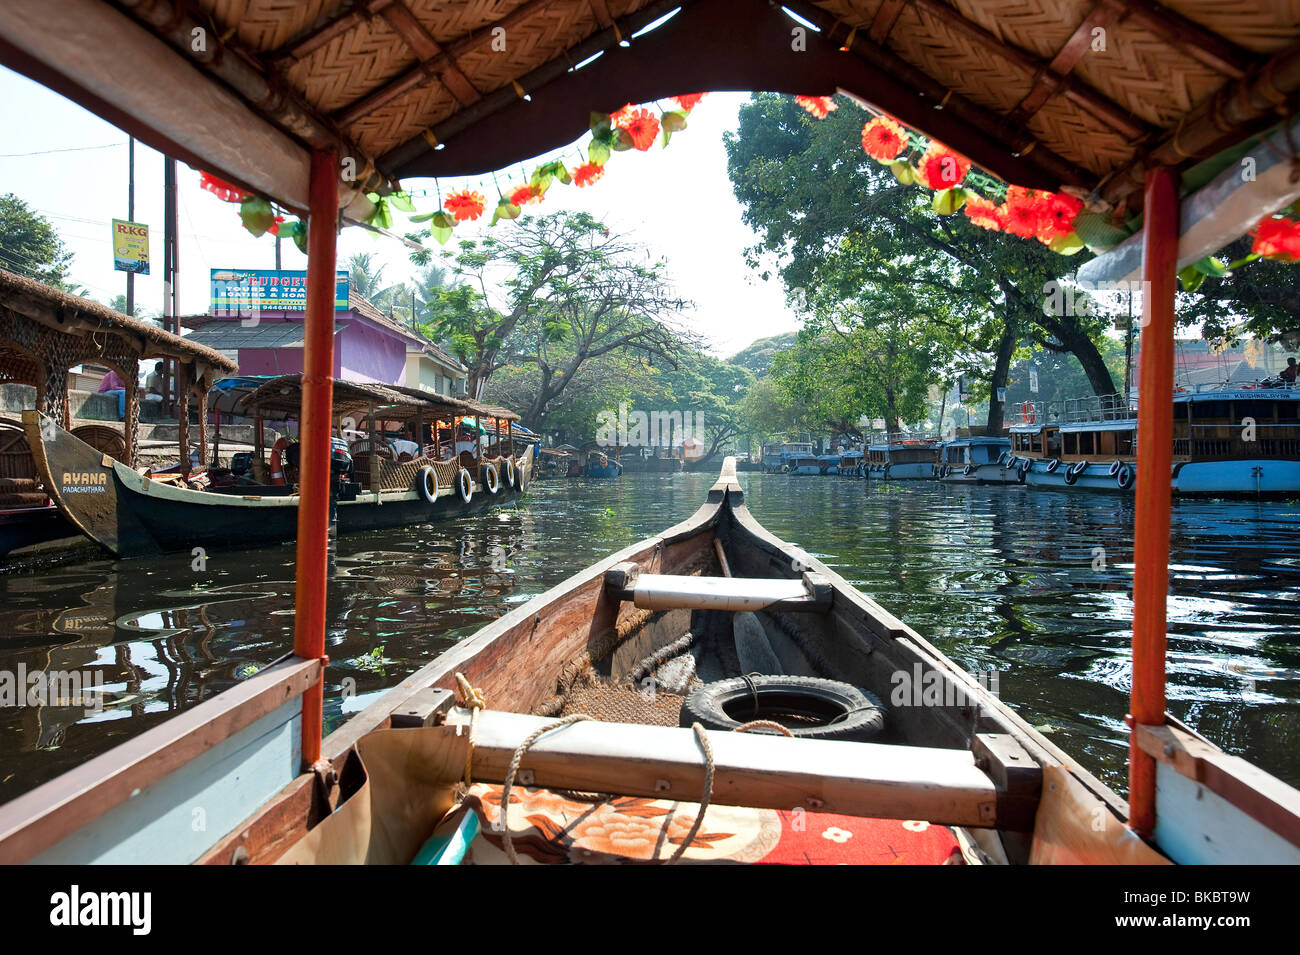 Boats in town, Alleppey Backwaters, Kerala, India Stock Photo